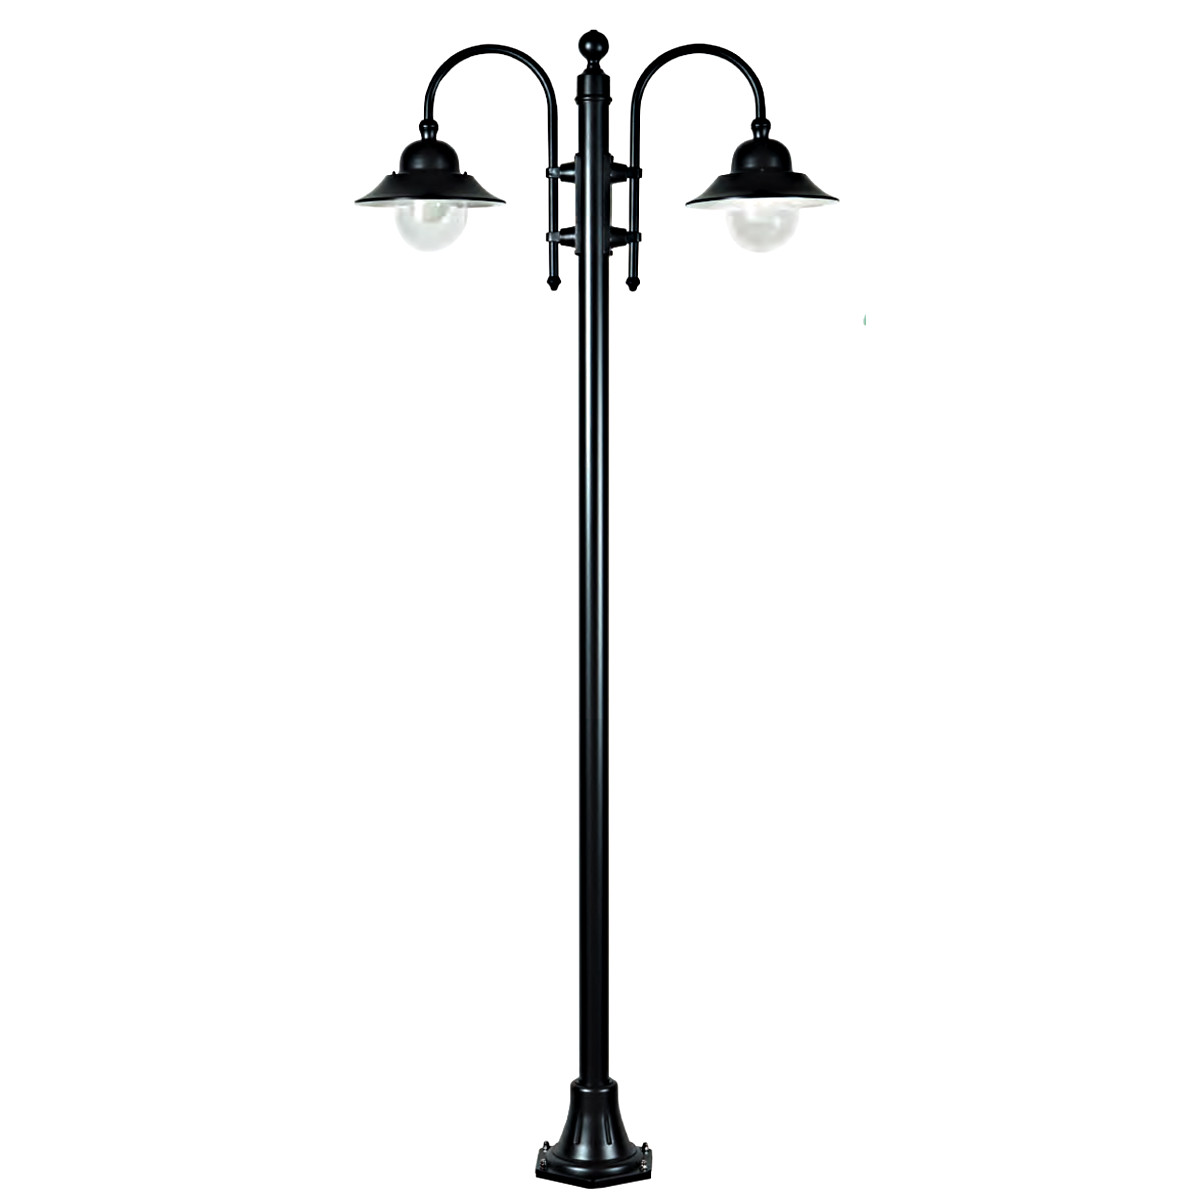 Double-flame Post Lamp for Pathways from Italy